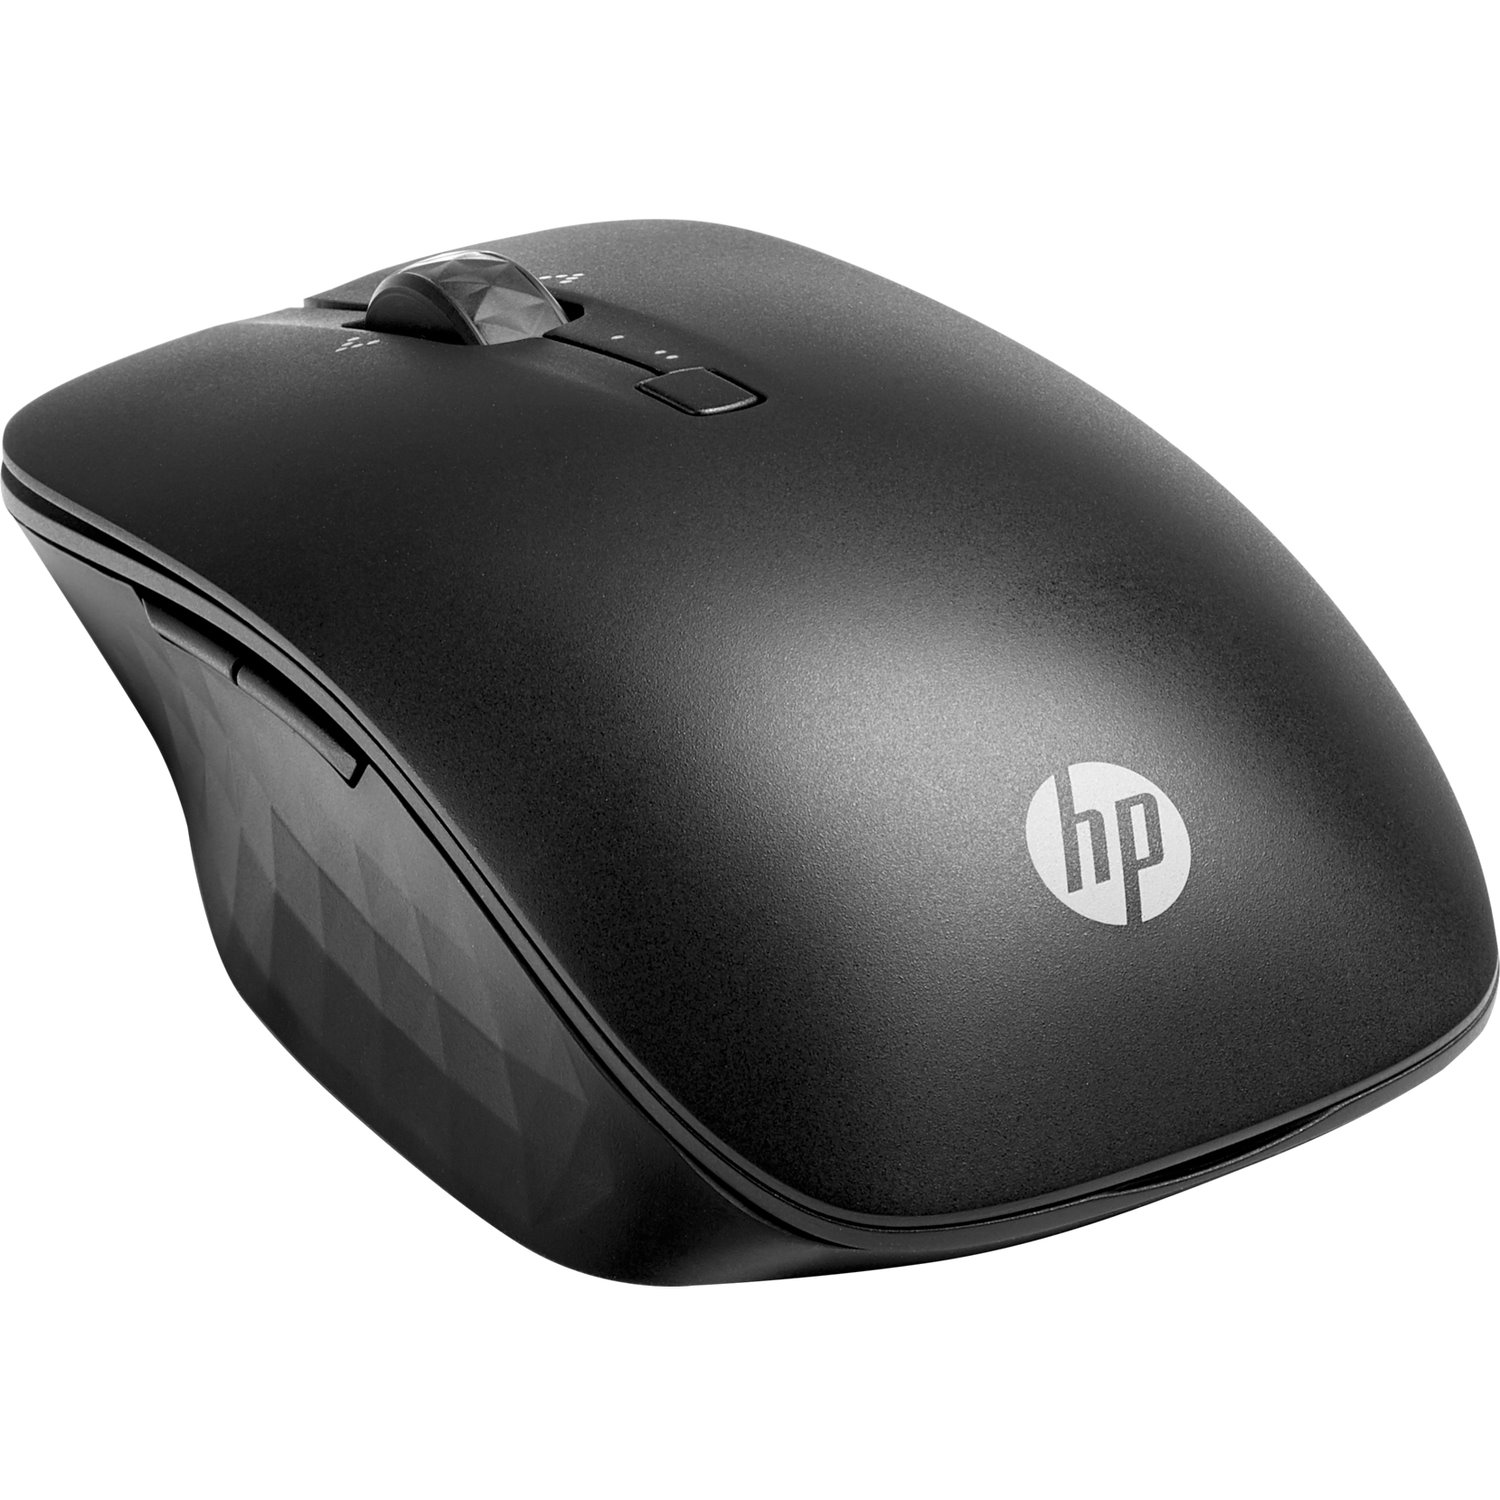 HP Mouse - Bluetooth - 5 Button(s) - Black